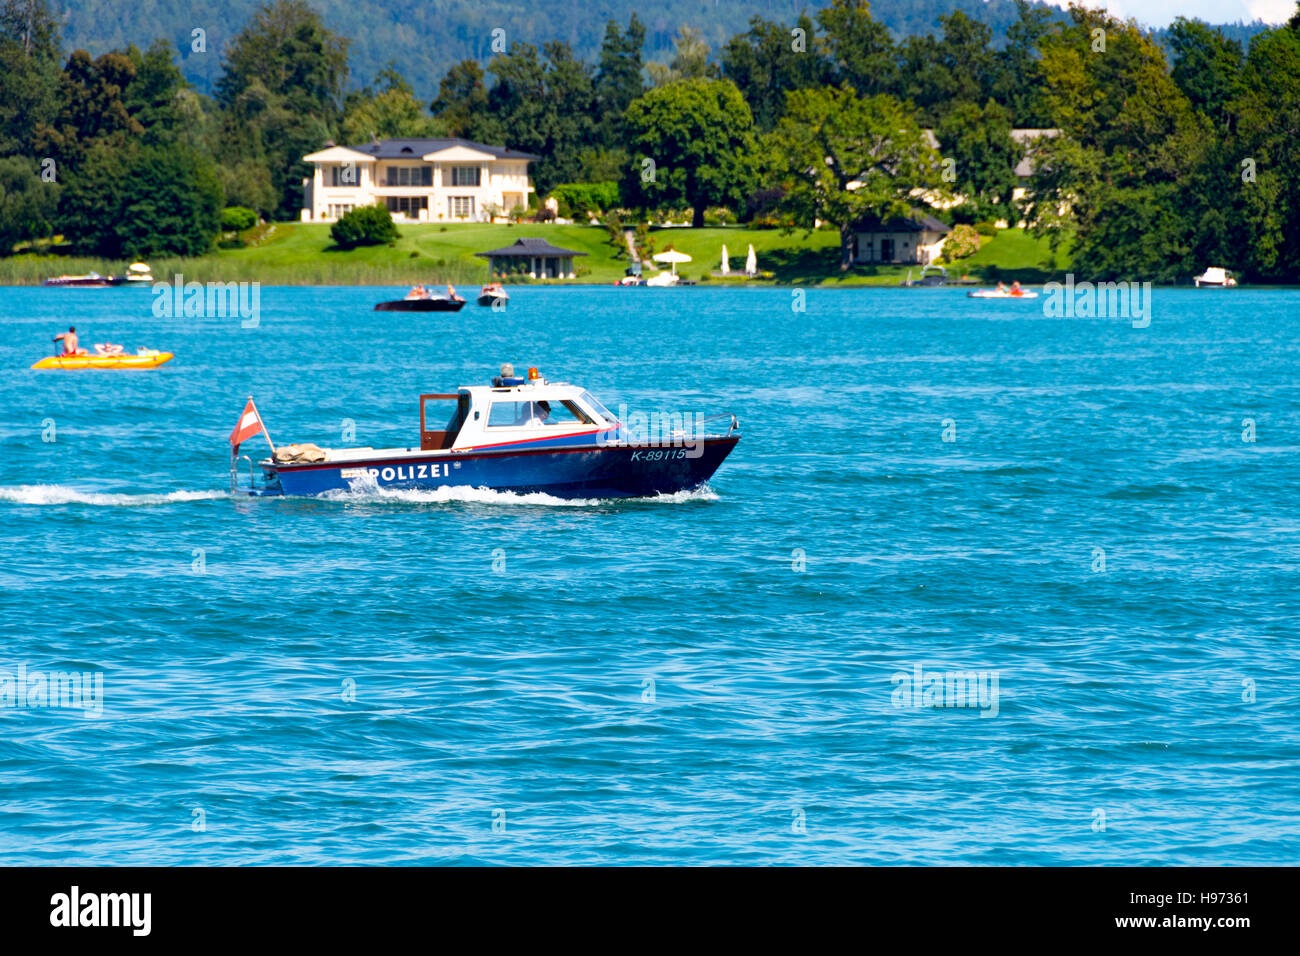 Klagenfurt, Austria - August 14 2016: Police boat patrolling the waters of lake Worthersee in Carinthia, Austria Stock Photo